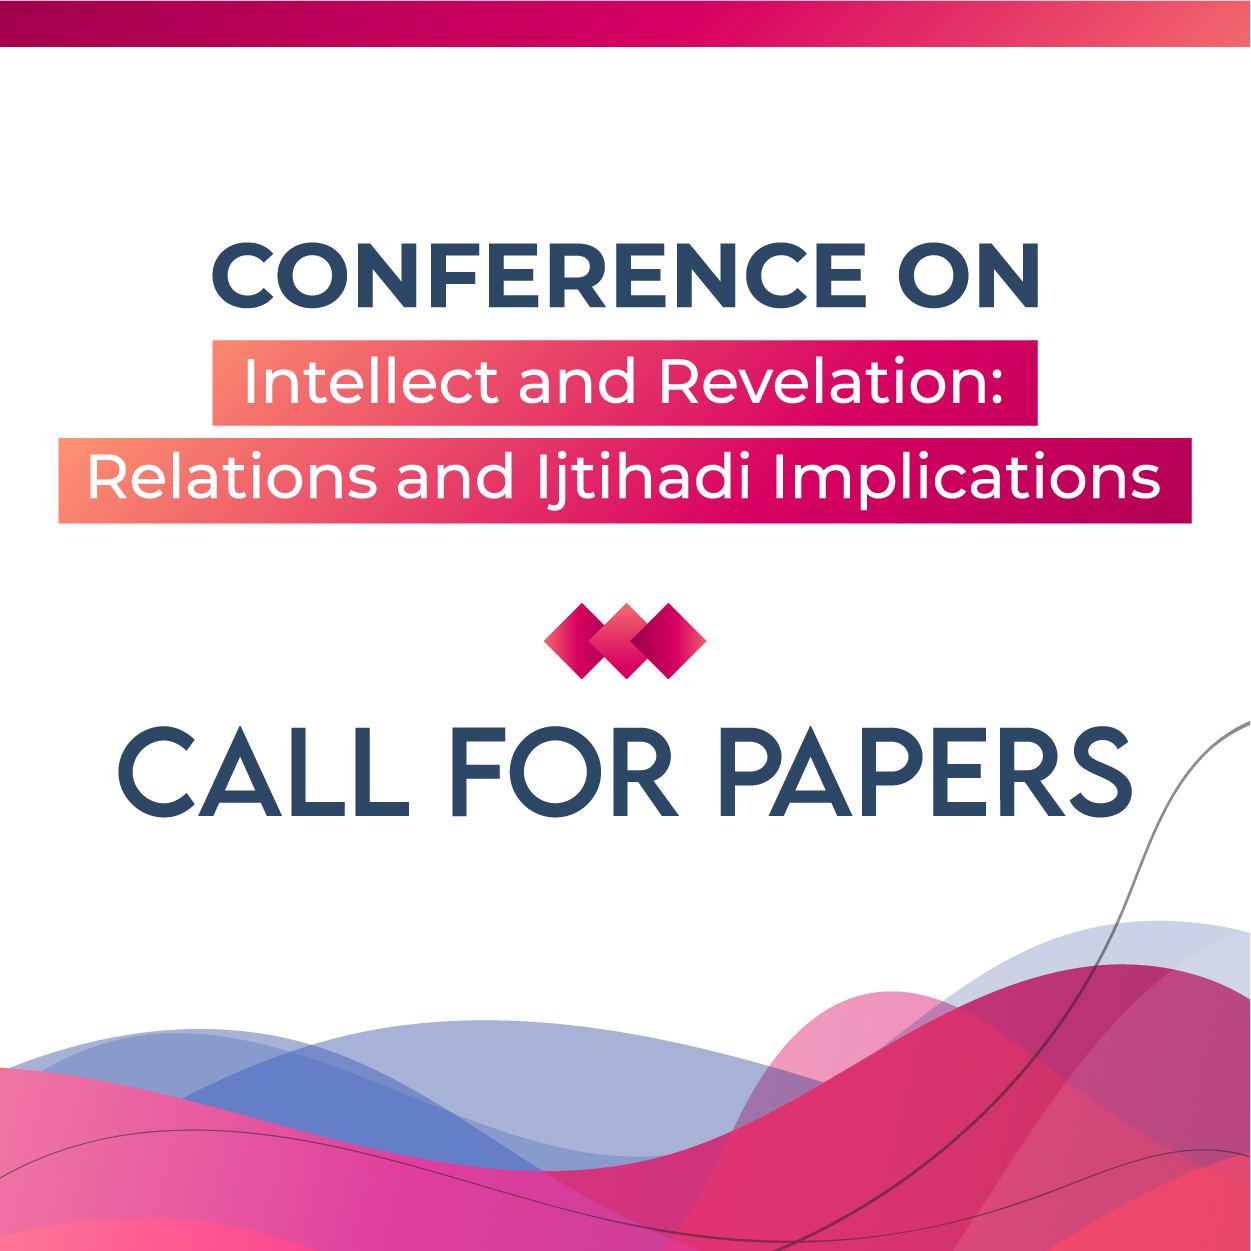 Call For Papers at the International Conference: “Intellect and Revelation: Relations and Ijtihadi Implications.”